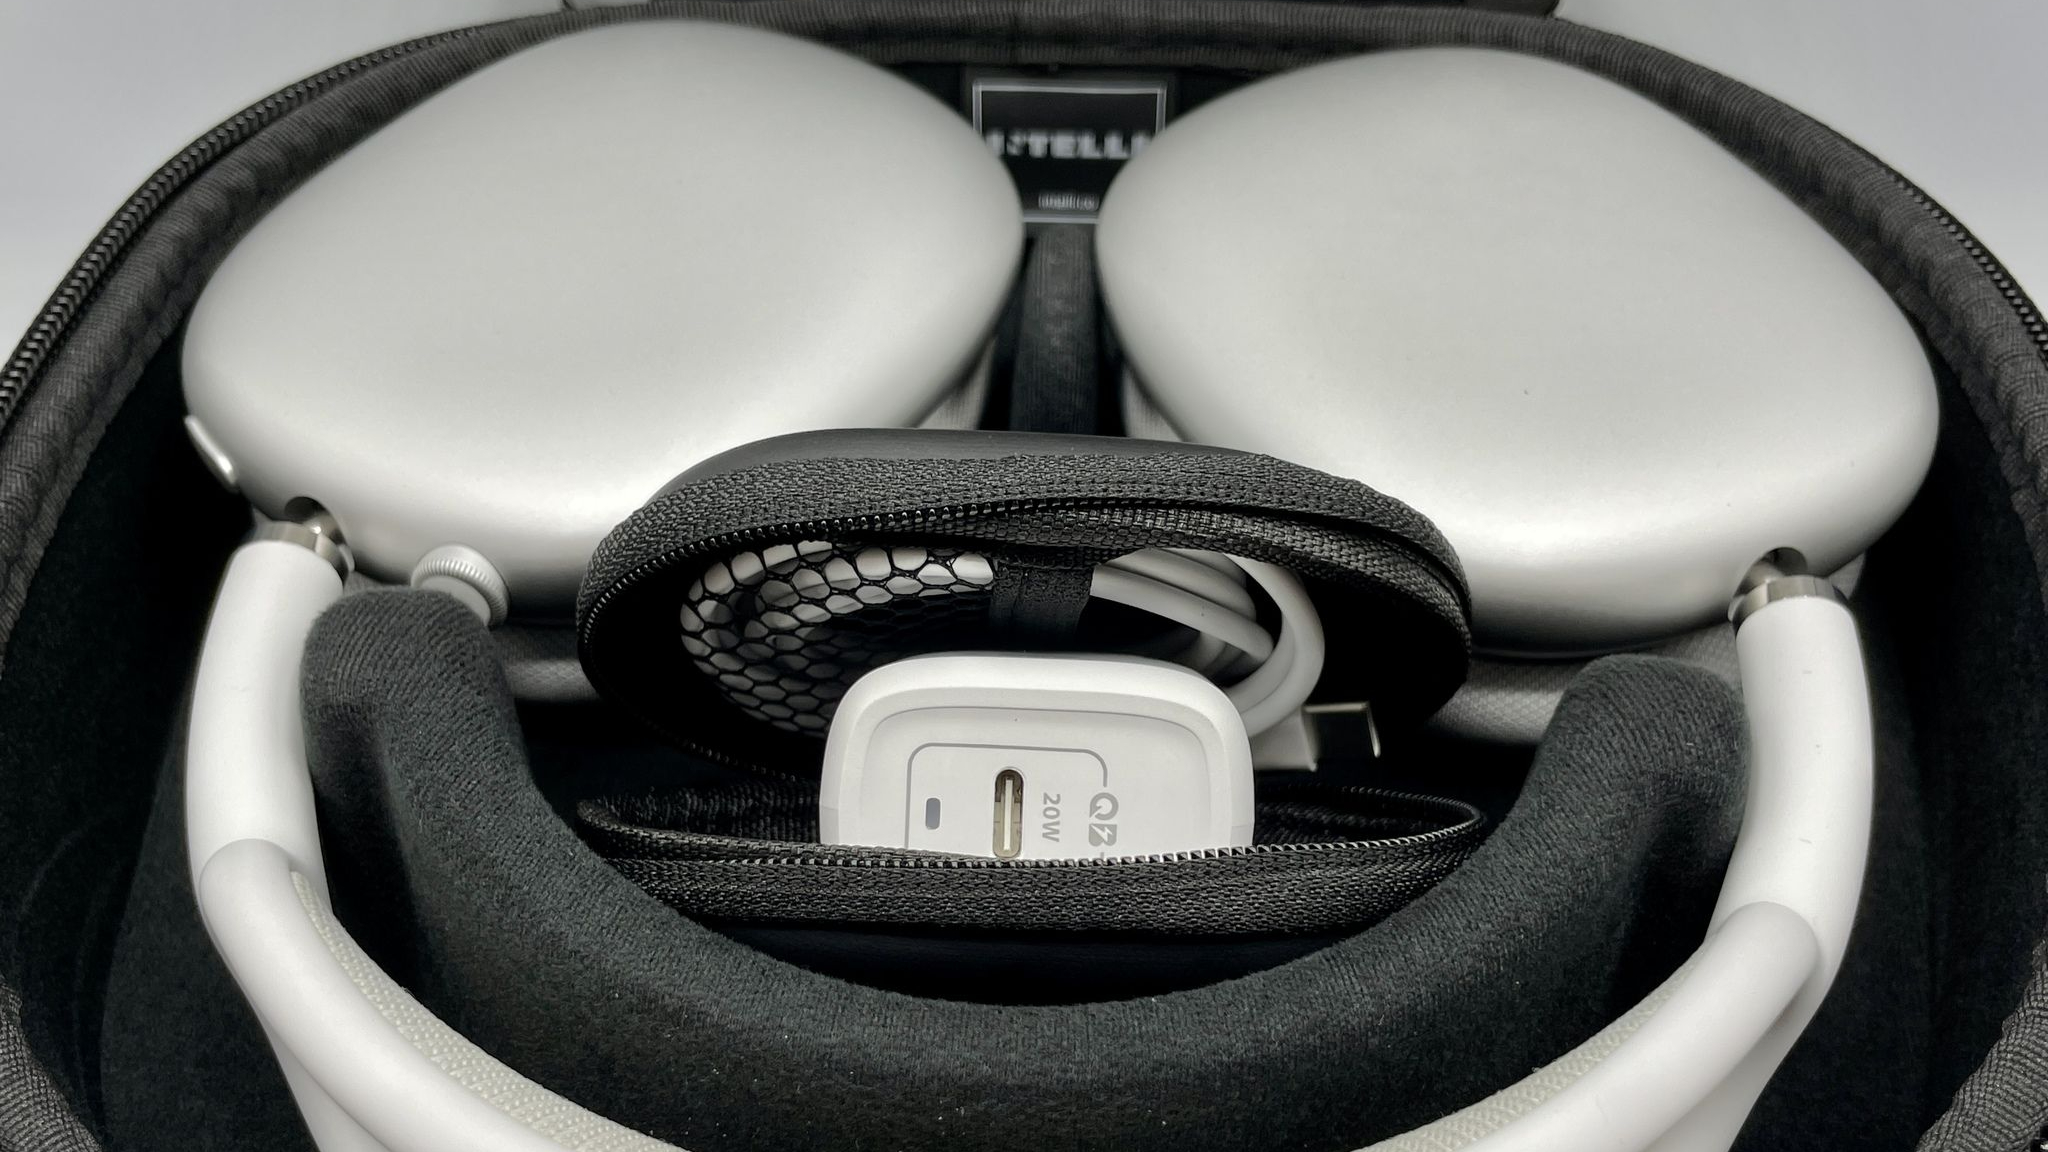 Intelli Carryon case for AirPods Max in use.